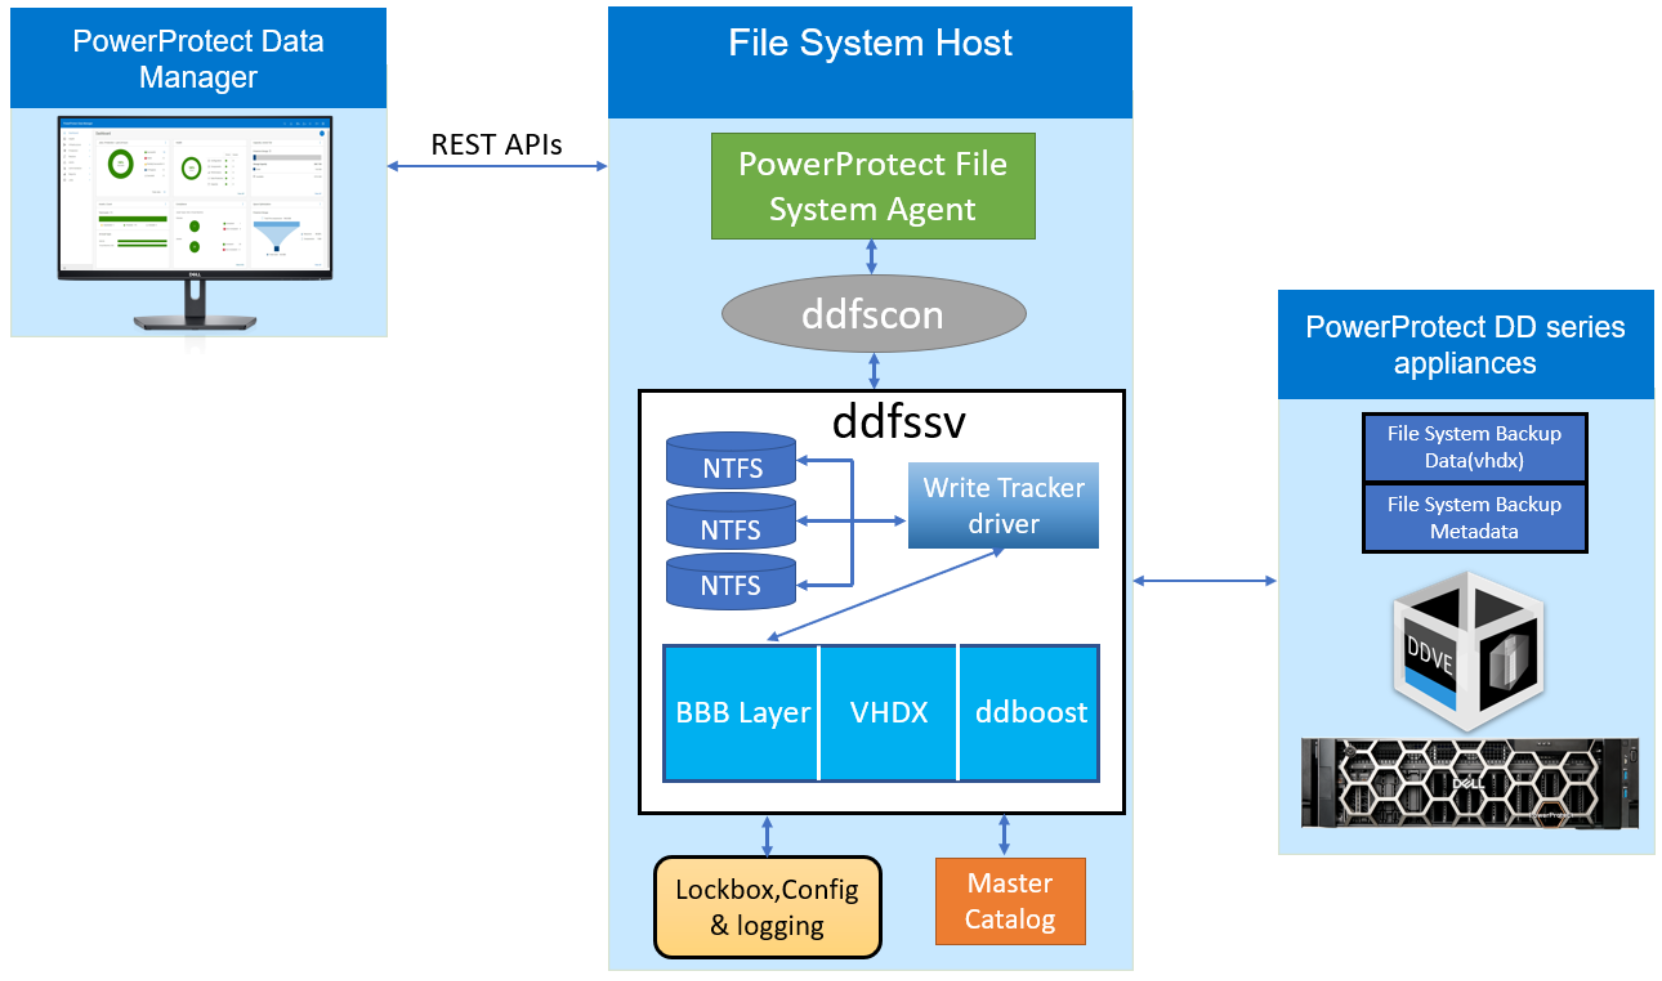 This image shows the overview of Block-Based Backup technology with PowerProtect Data Manager.